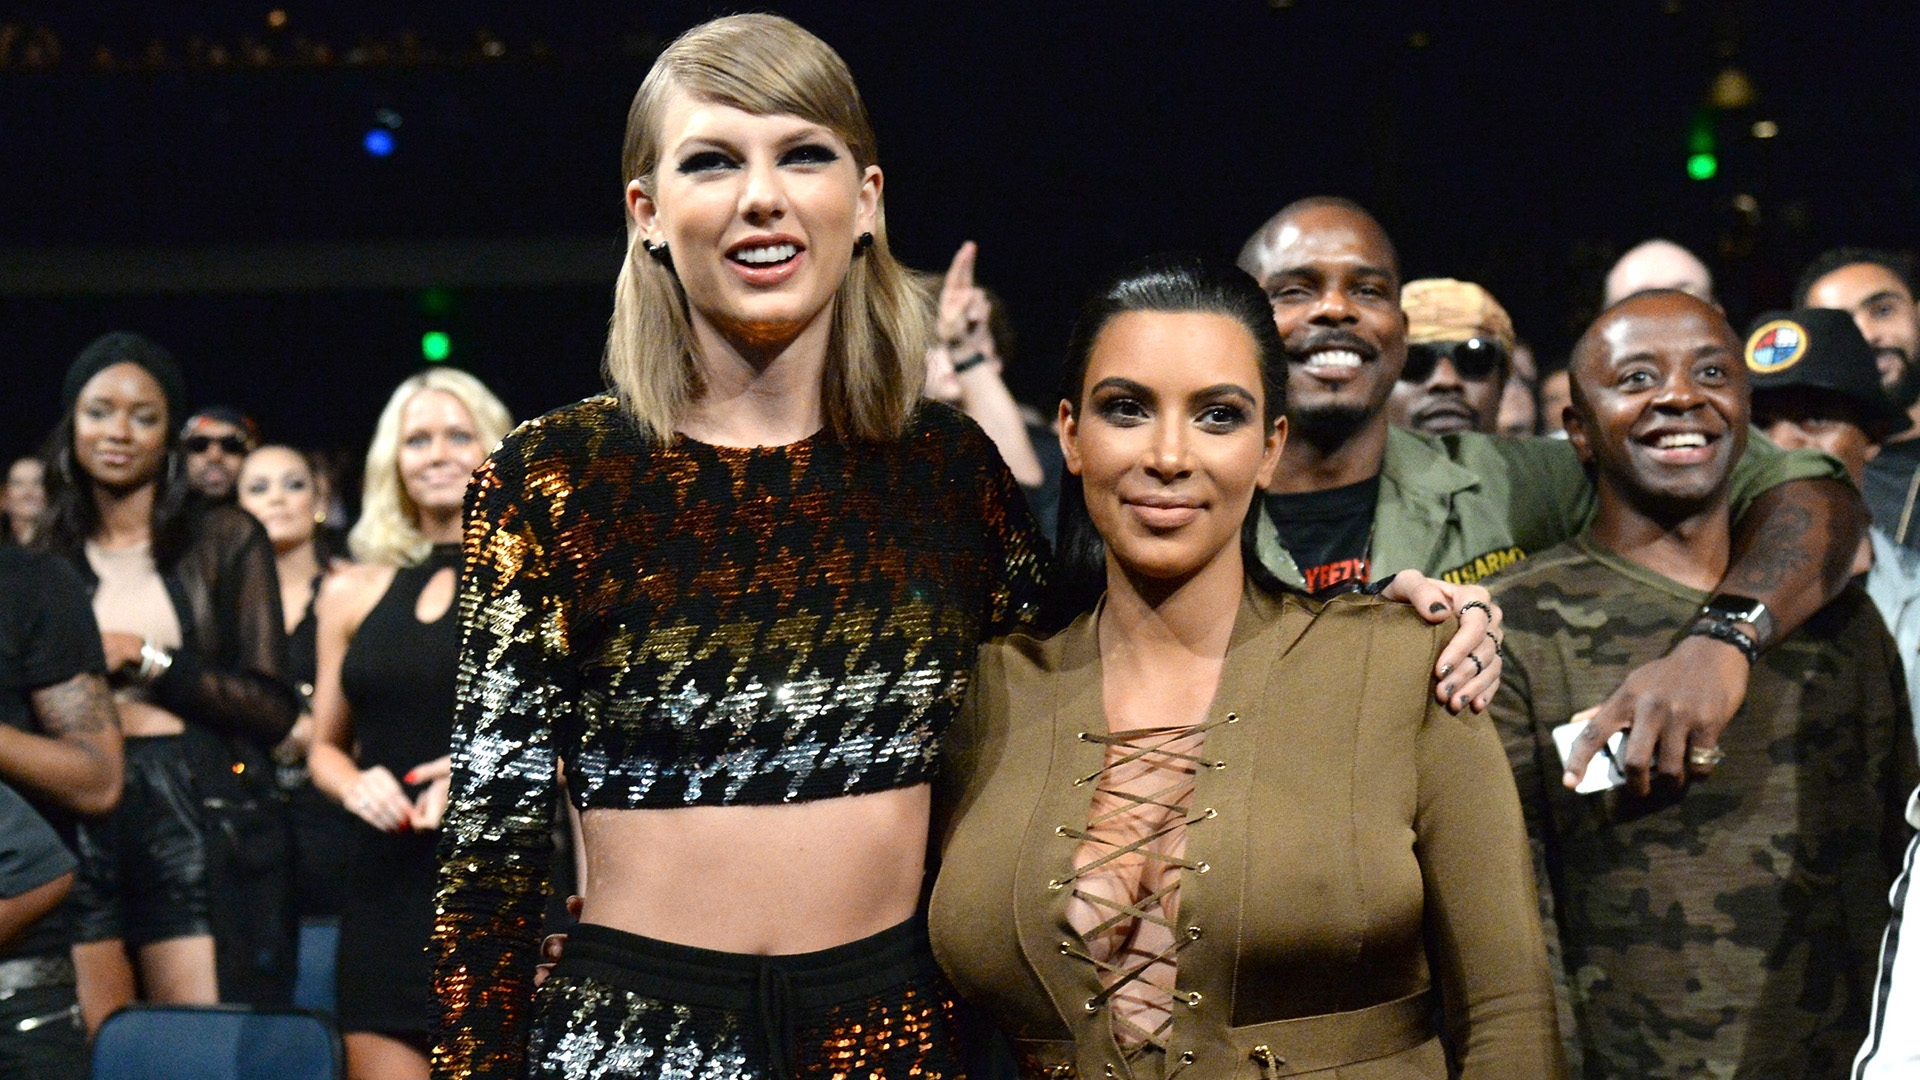 Internet Booming: Who is more well-known, Kim Kardashian or Taylor Swift?